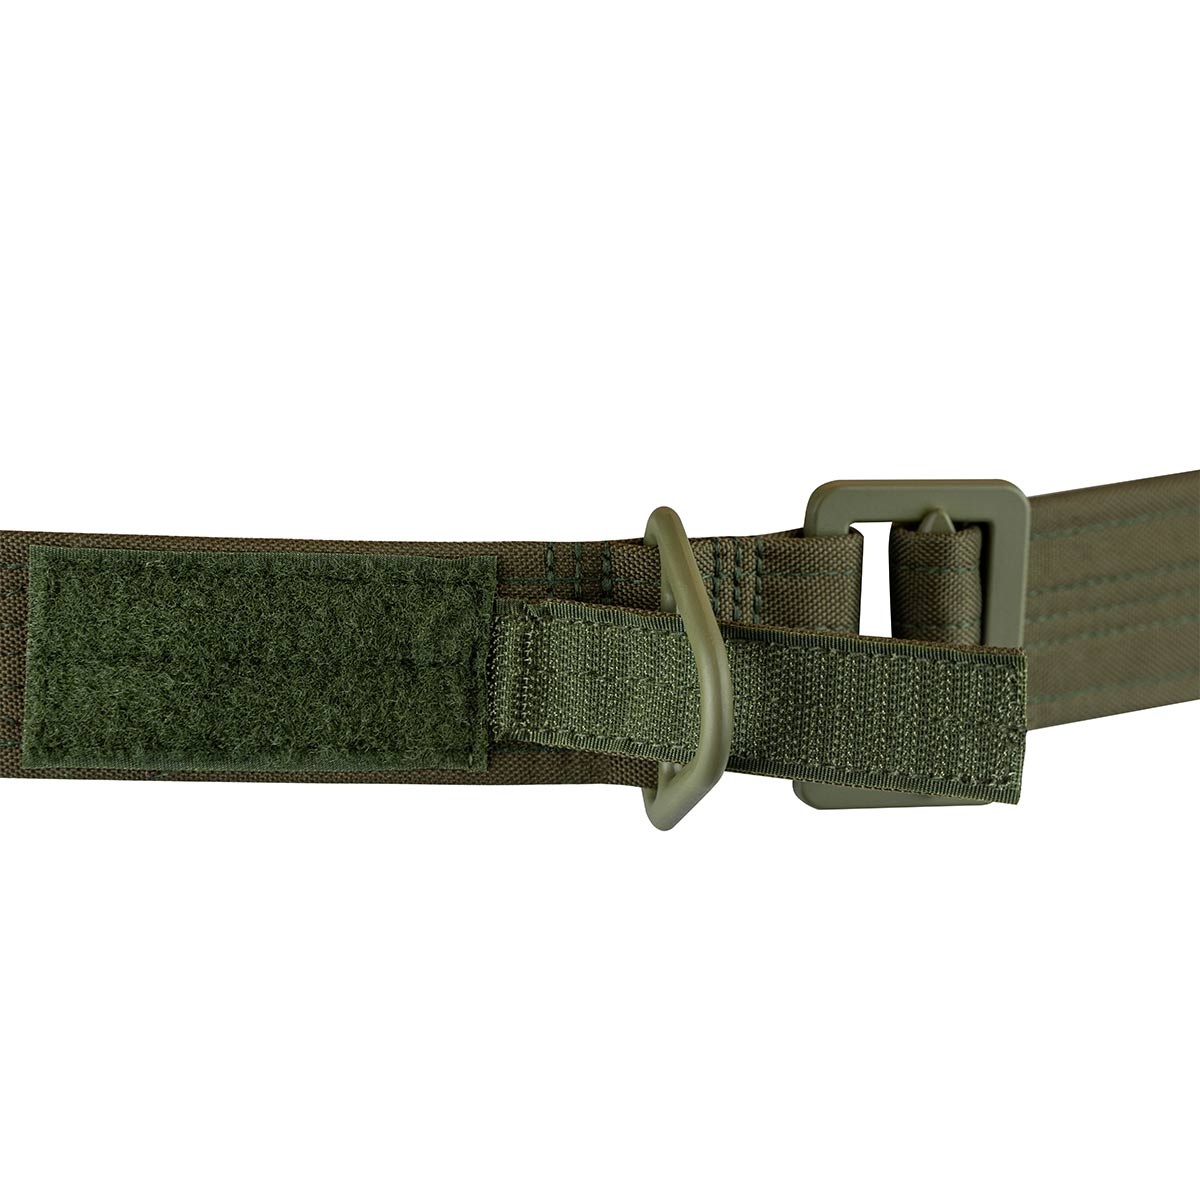 Viper Tactical Rigger Belt Vcam Army Airsoft Style Adjustable Metal Buckle 